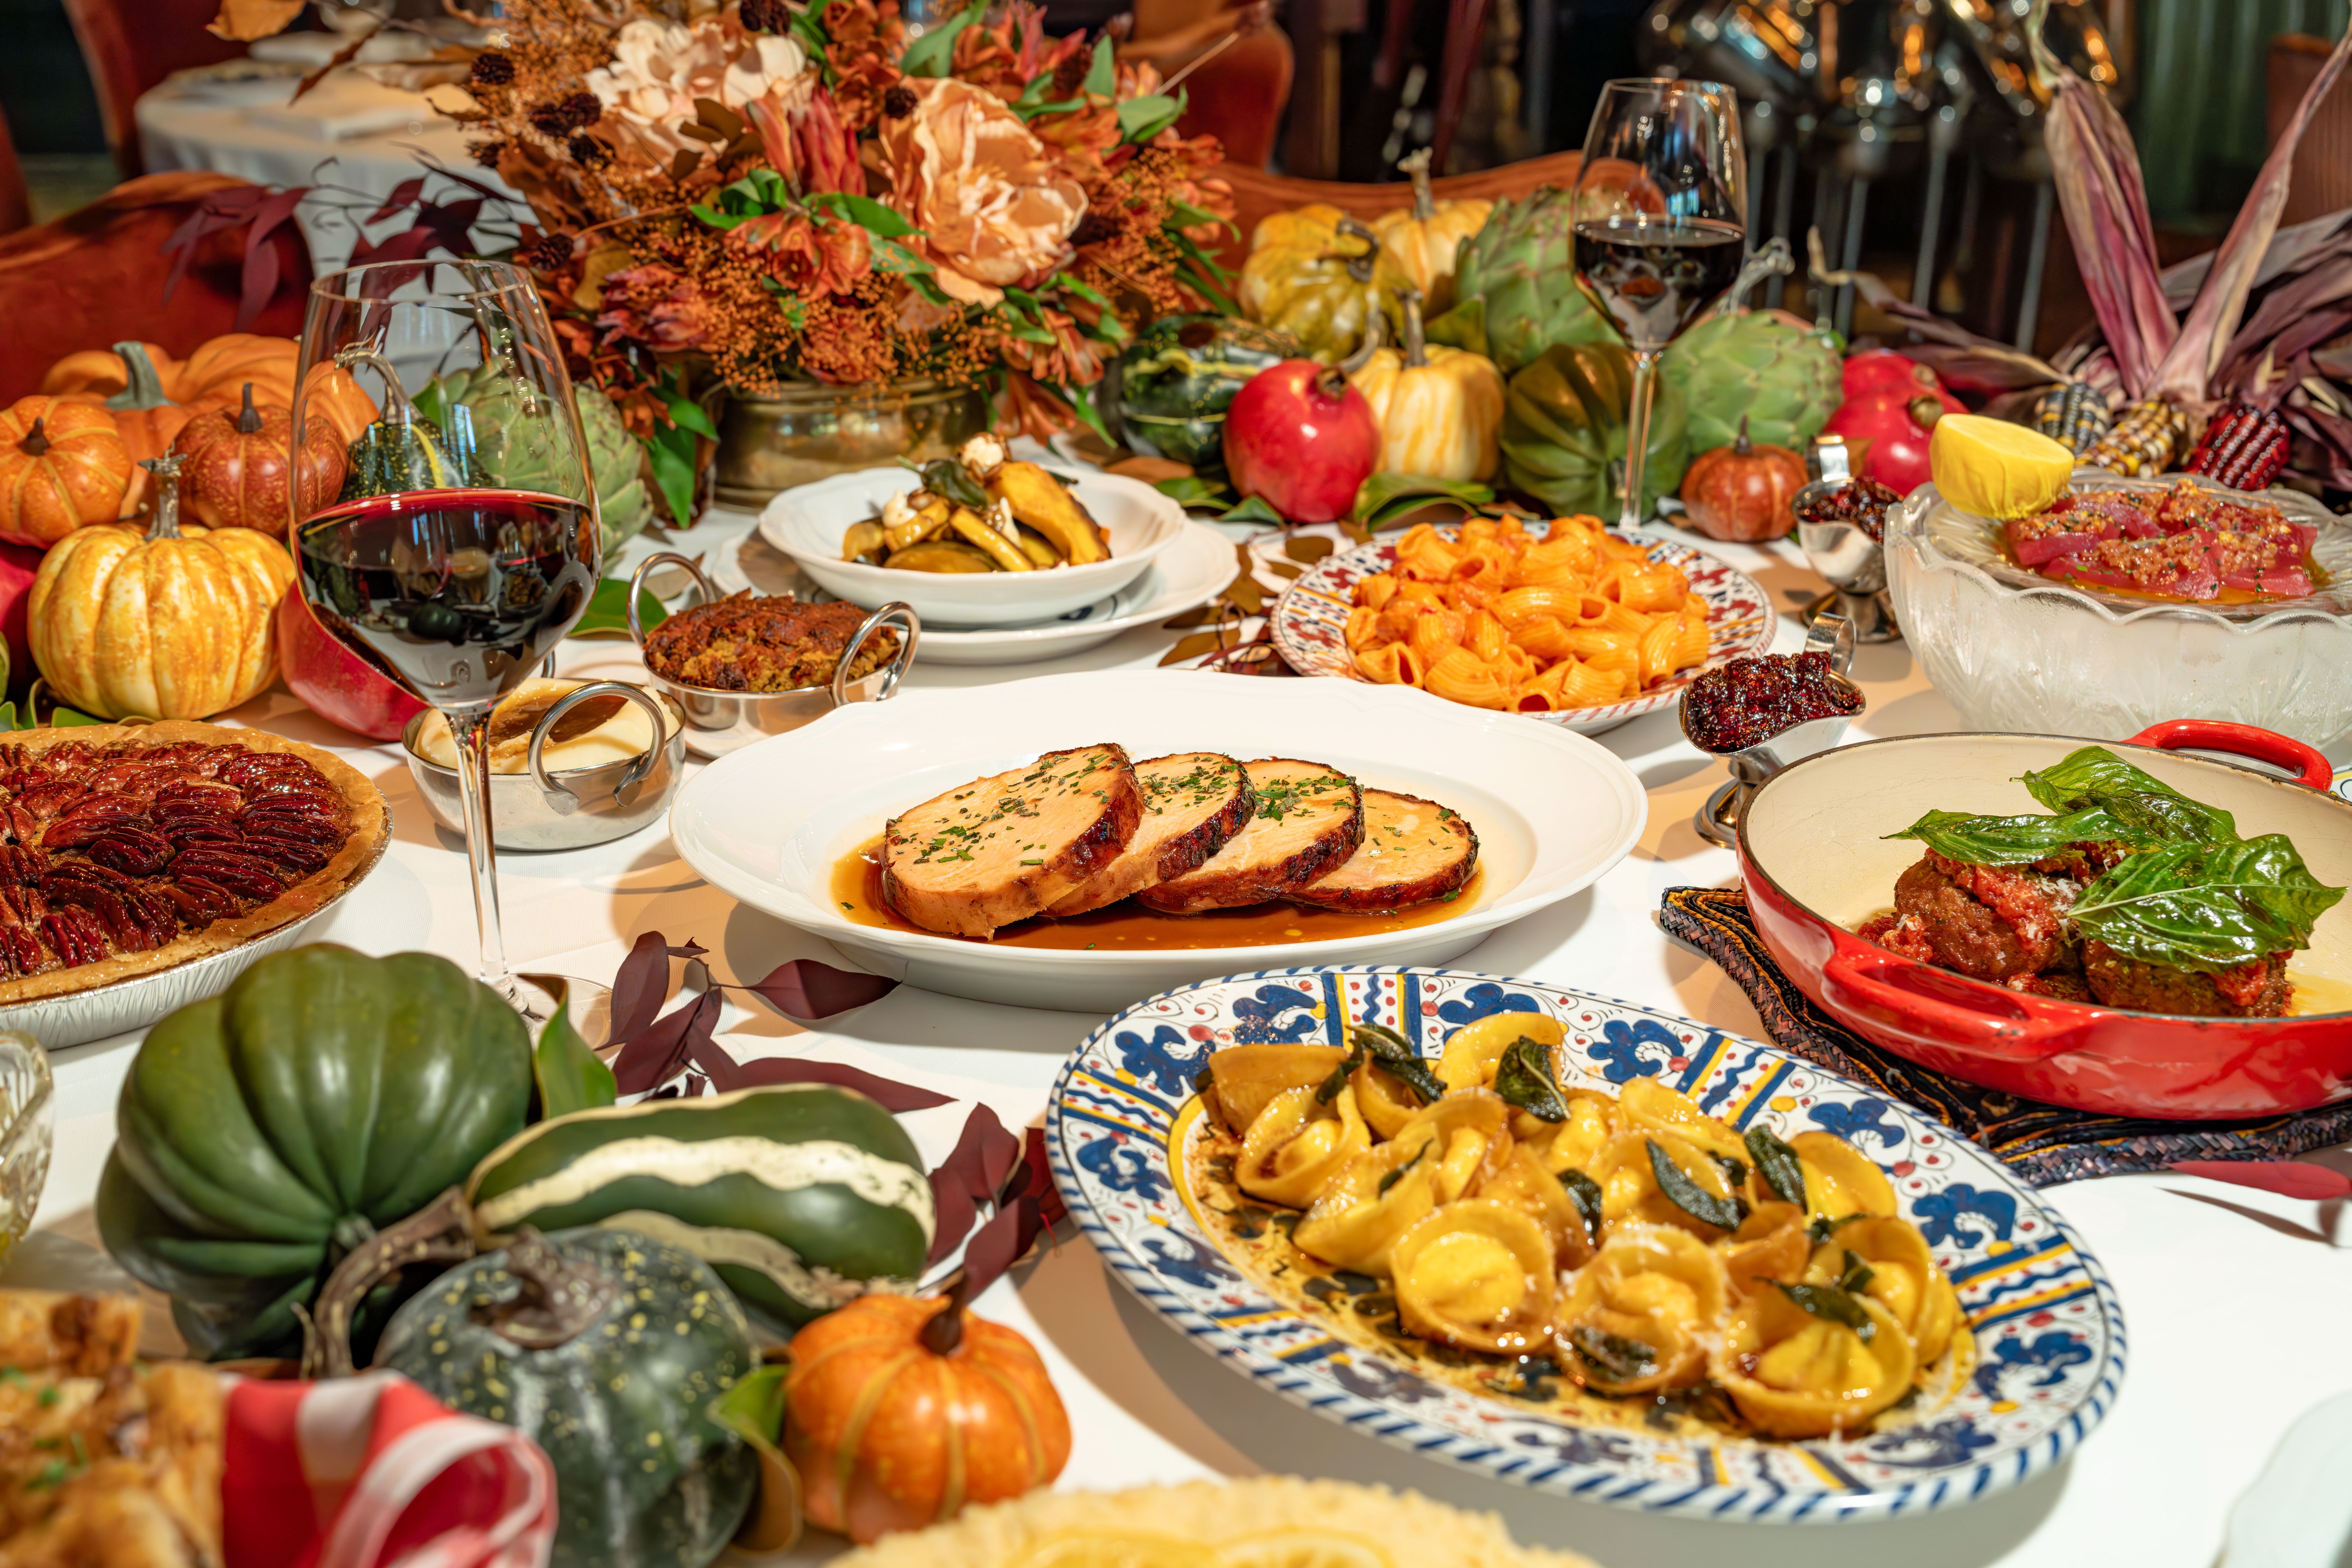 Selection from Carbone's Holiday Menu